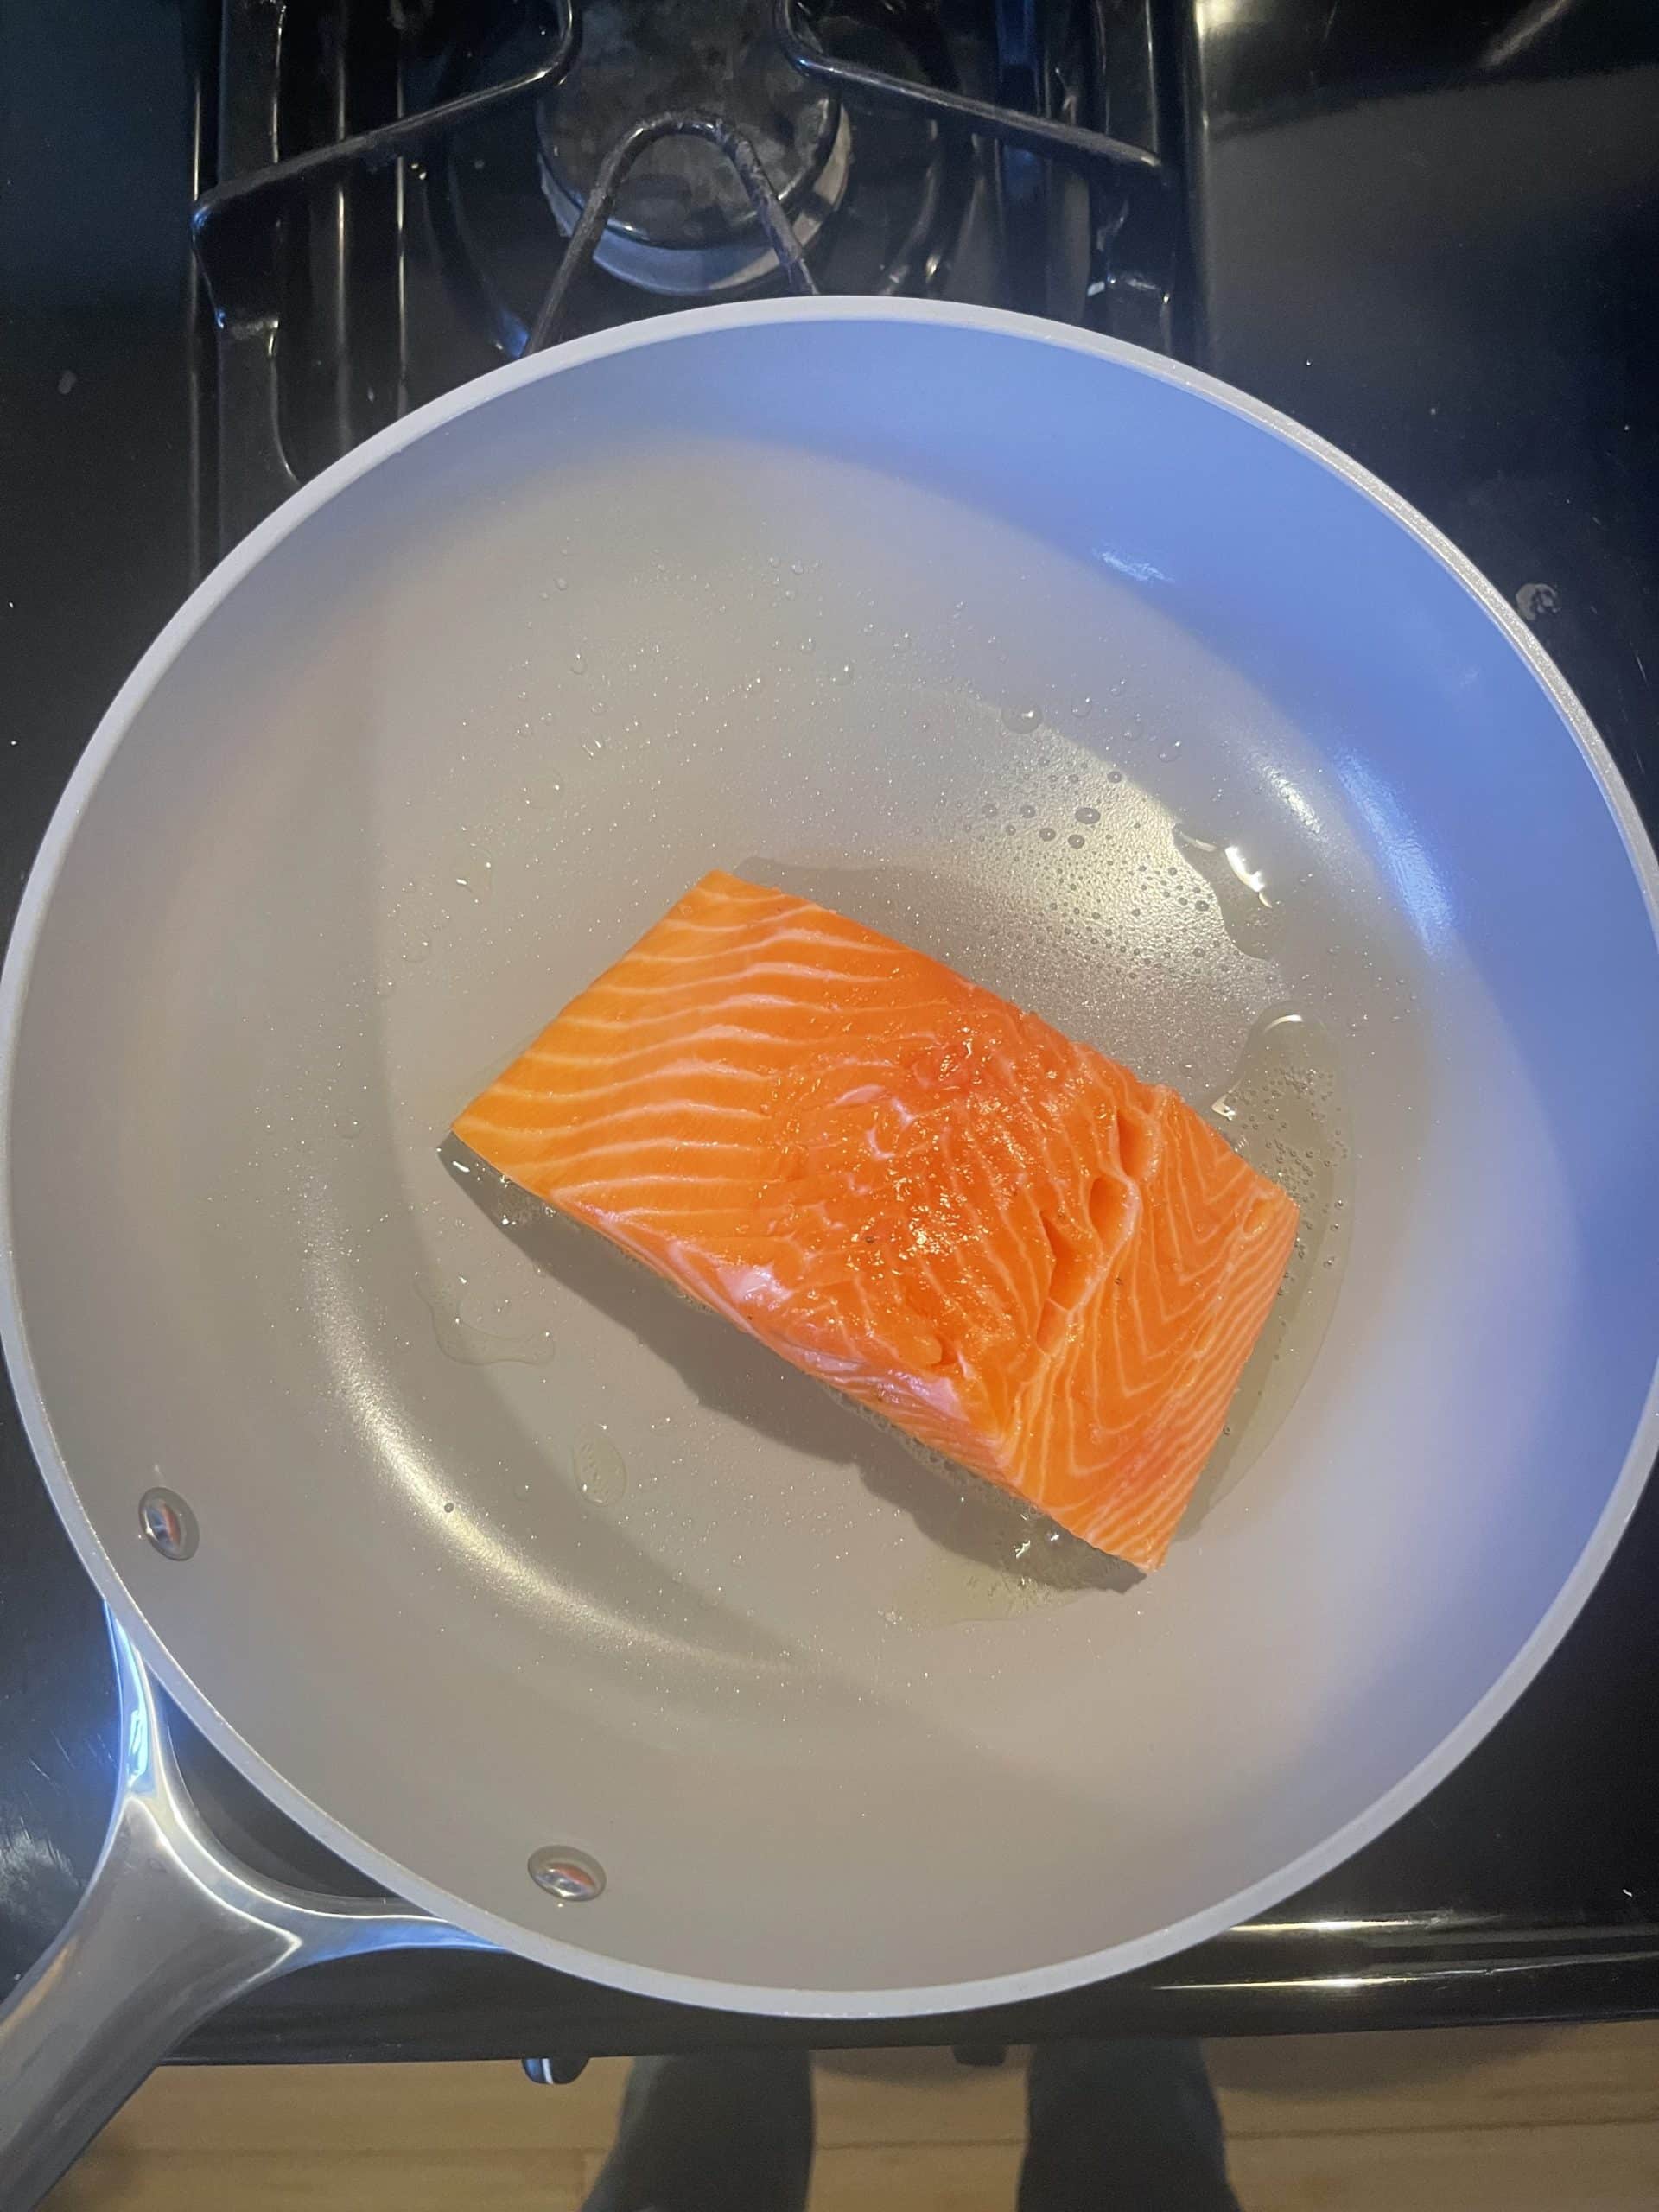 https://www.leafscore.com/wp-content/uploads/2022/10/Caraway-salmon-scaled.jpg